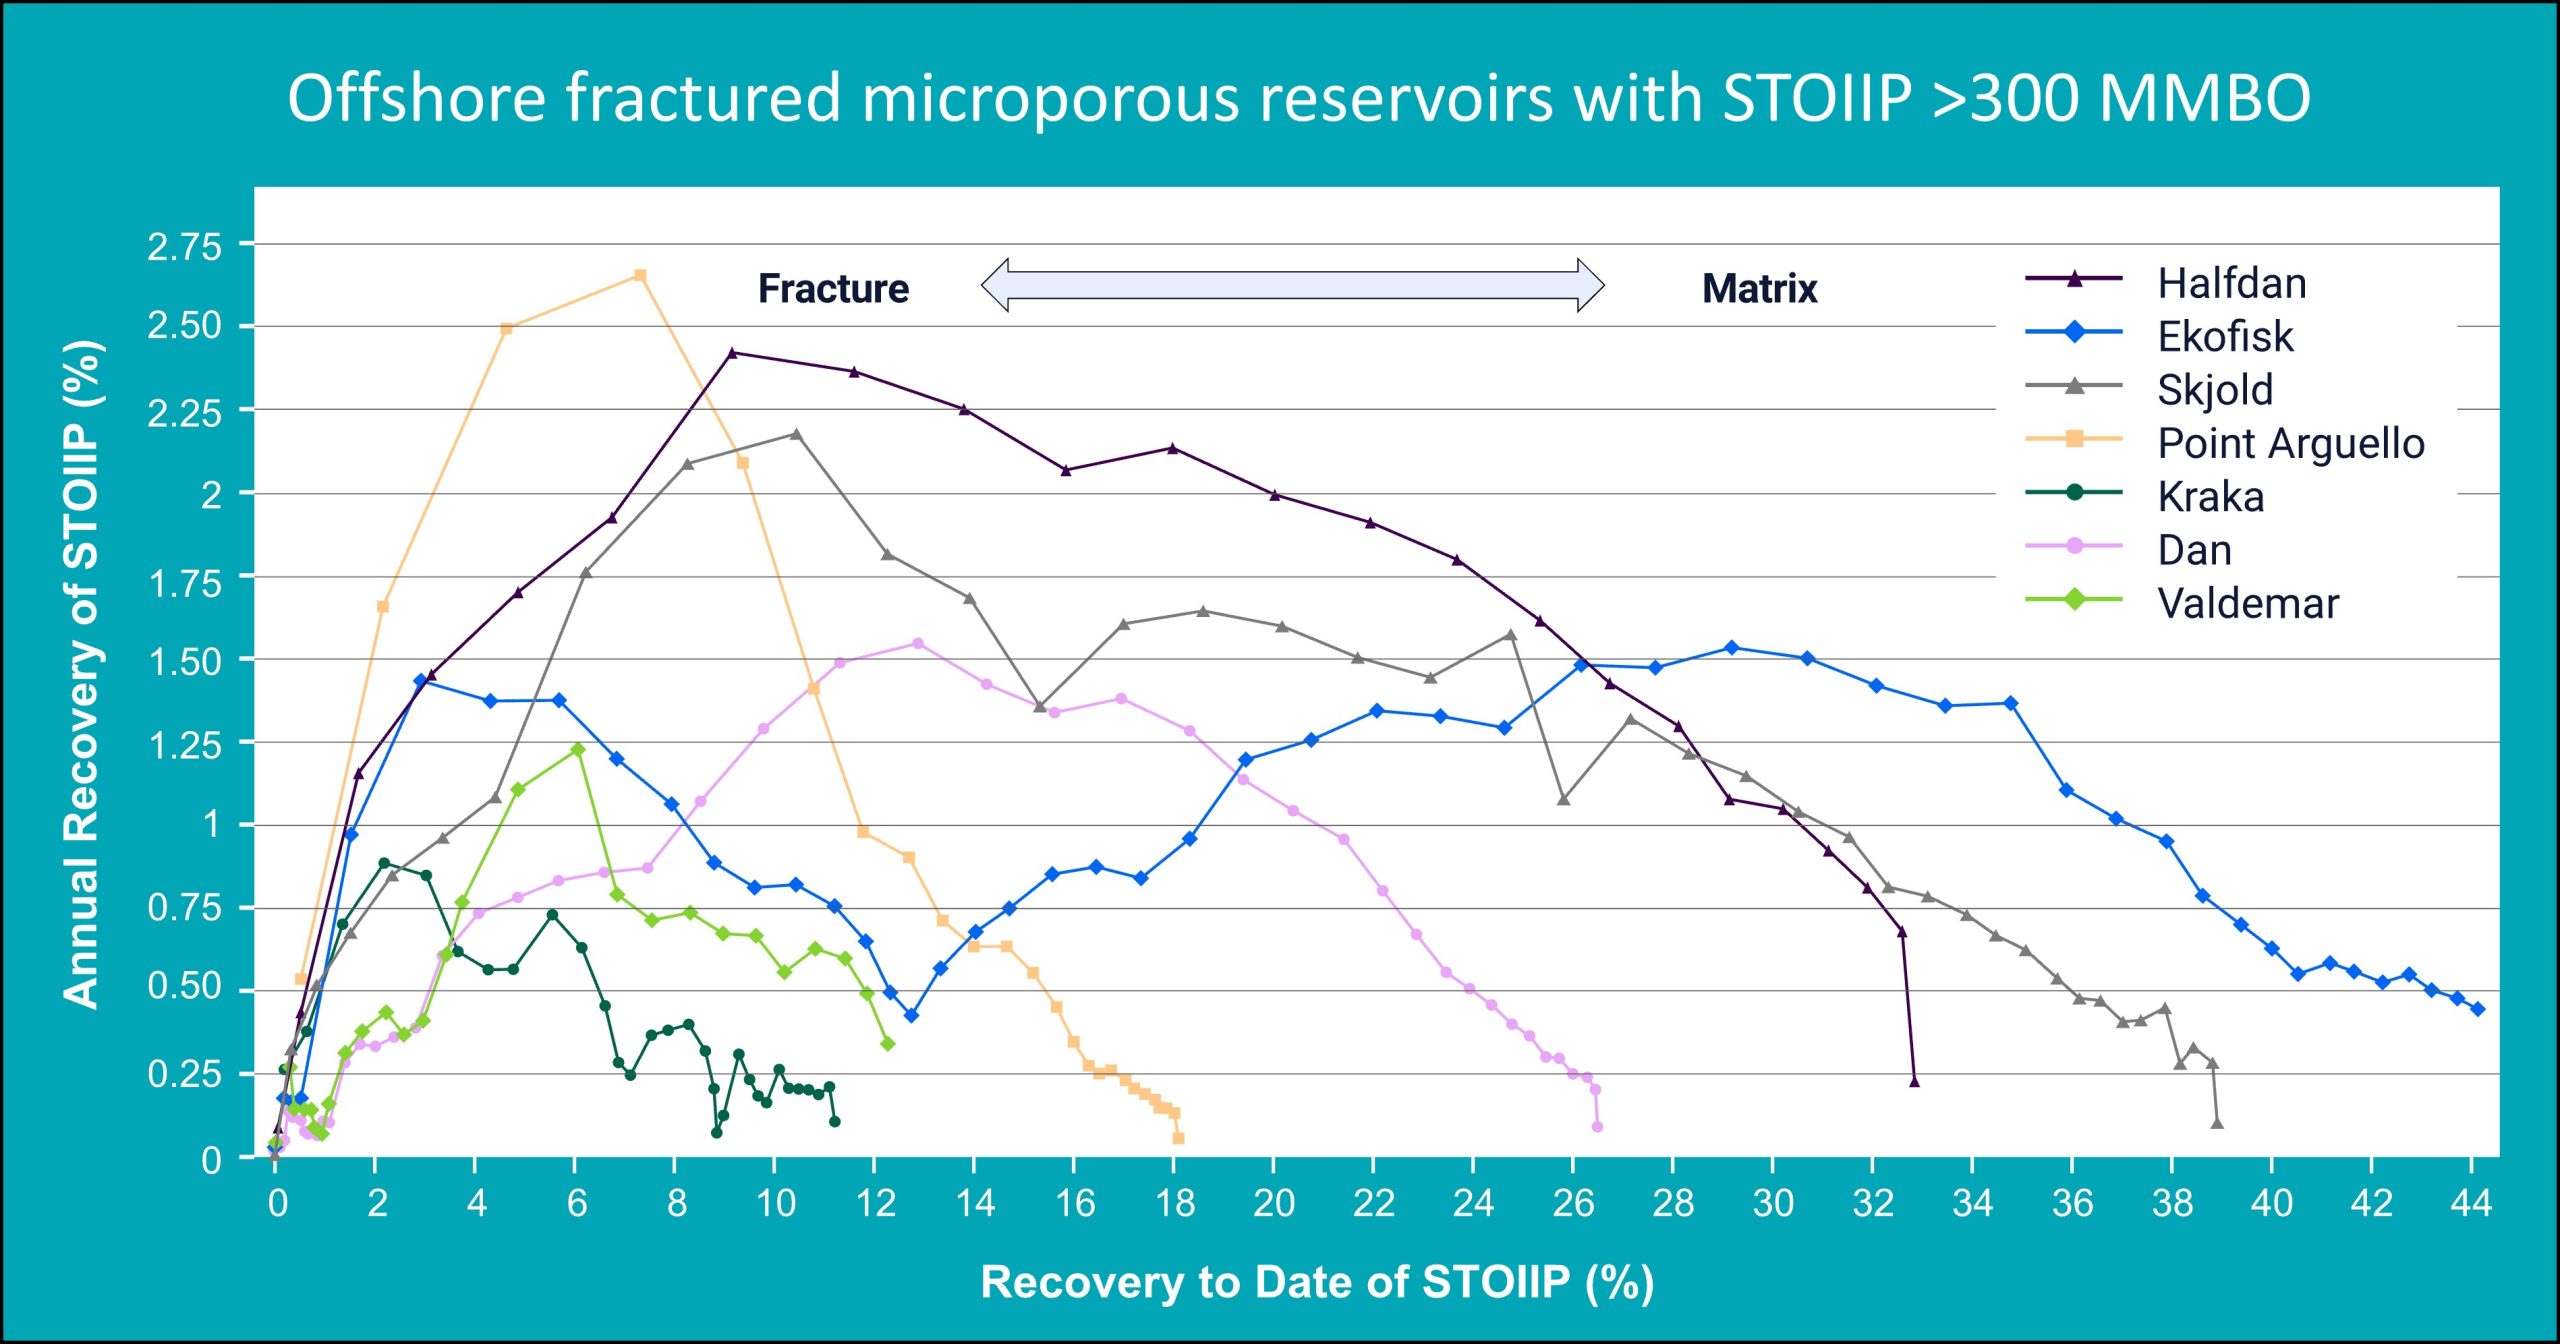 Fig. 4 - Normalized production performance chart for seven offshore fractured microporous oil reservoirs for which reliable production data are available: annual recovery (expressed as % of in-place oil) versus recovery-to-date (as a percentage of in-place oil).